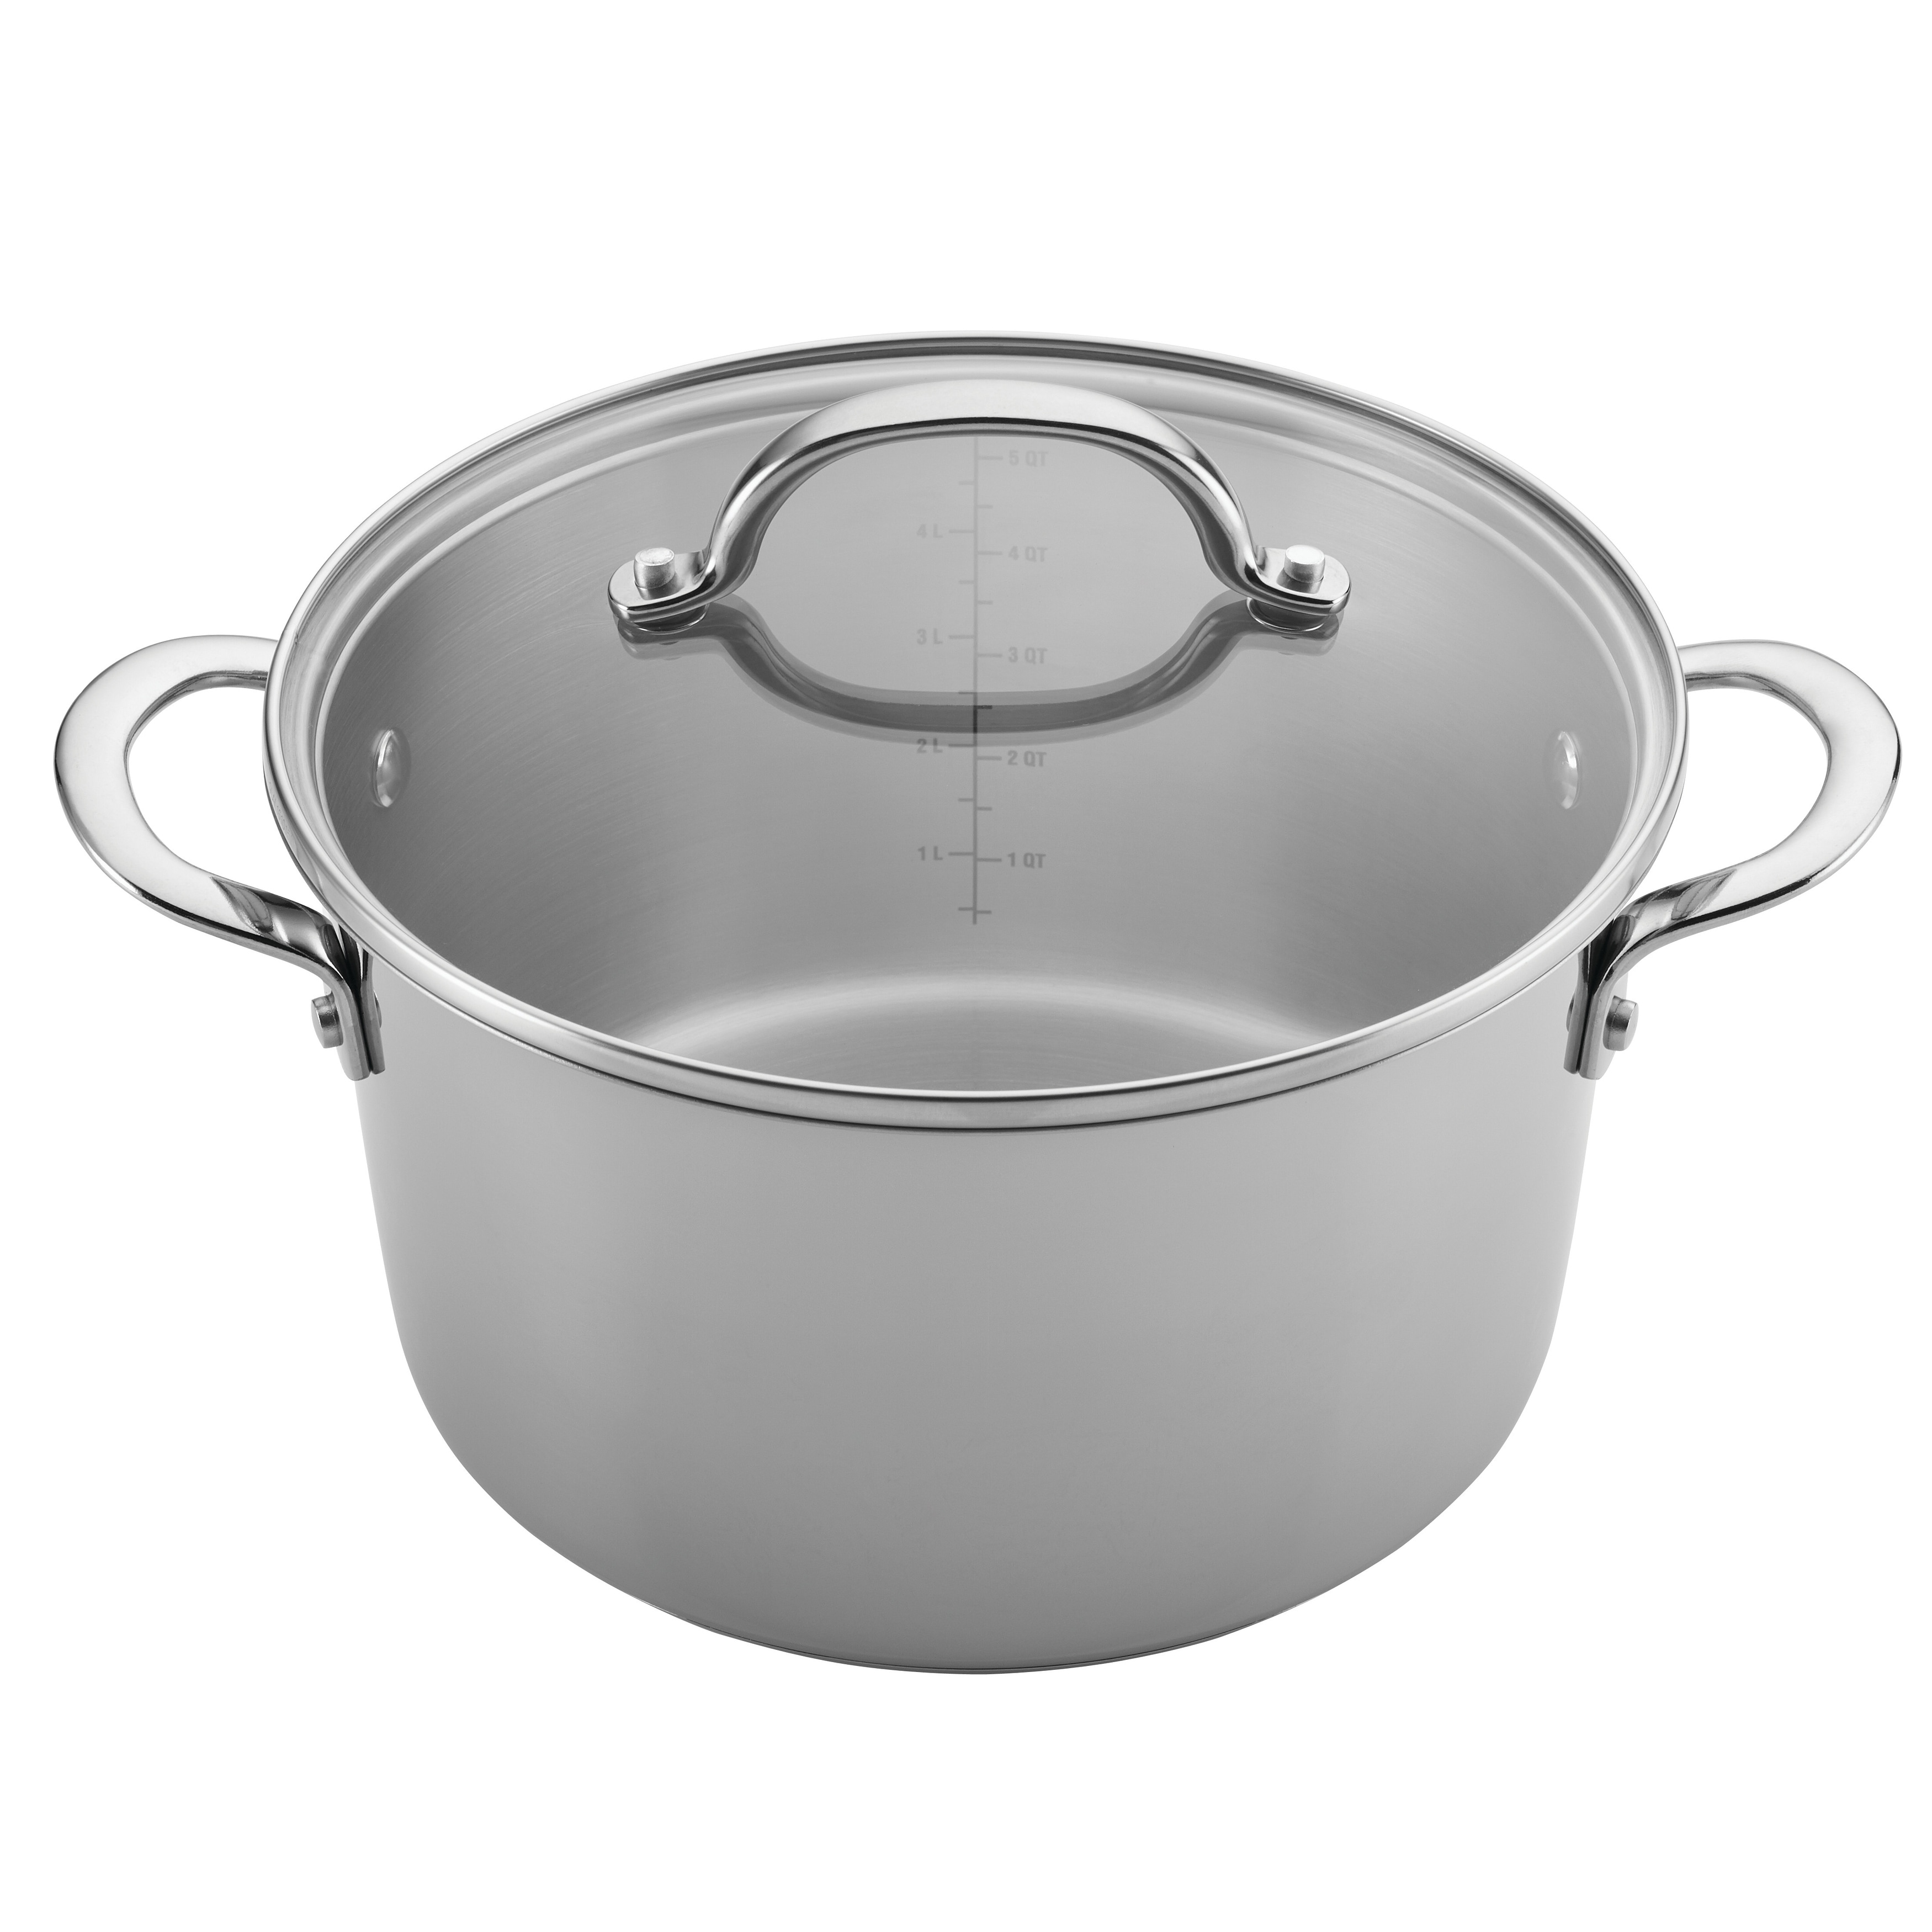 https://ak1.ostkcdn.com/images/products/is/images/direct/148e3ee7f894ba641761d794b30e3895ceb769e2/Ayesha-Curry-Home-Collection-Stainless-Steel-Cookware-Set%2C-9-Piece.jpg